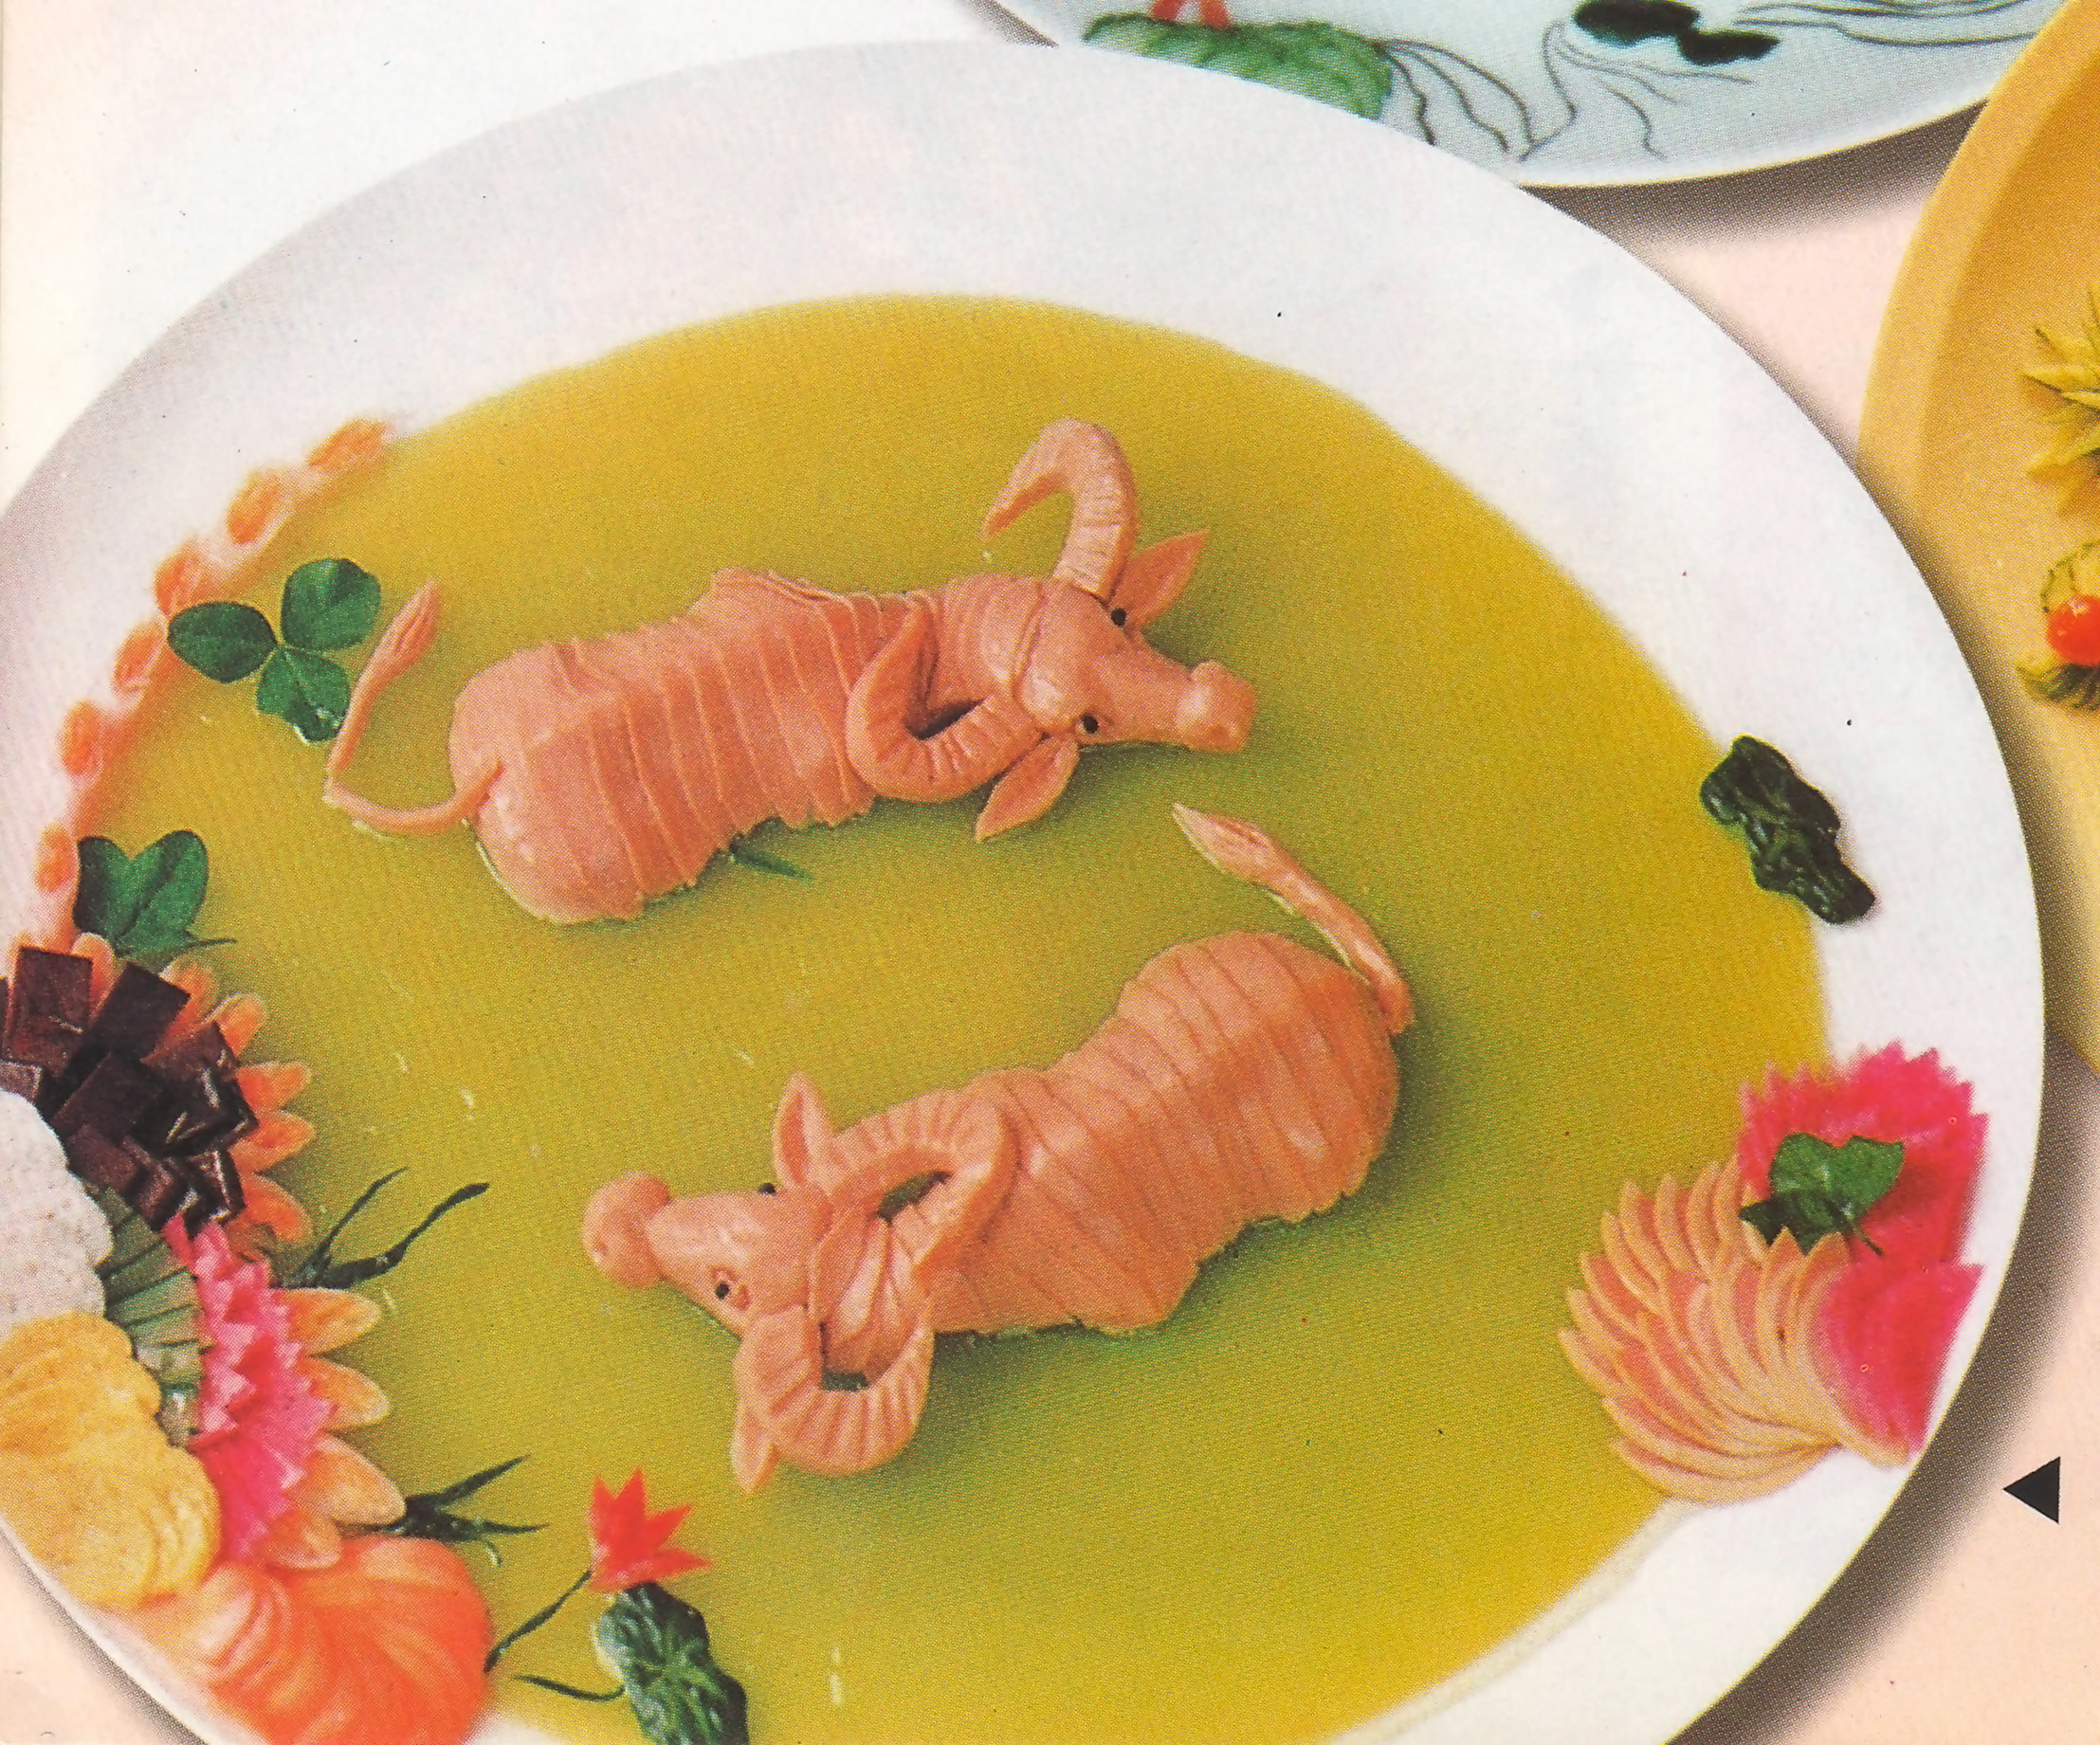 Two swimming water buffalo are made out of ham on a specially designed plate of food